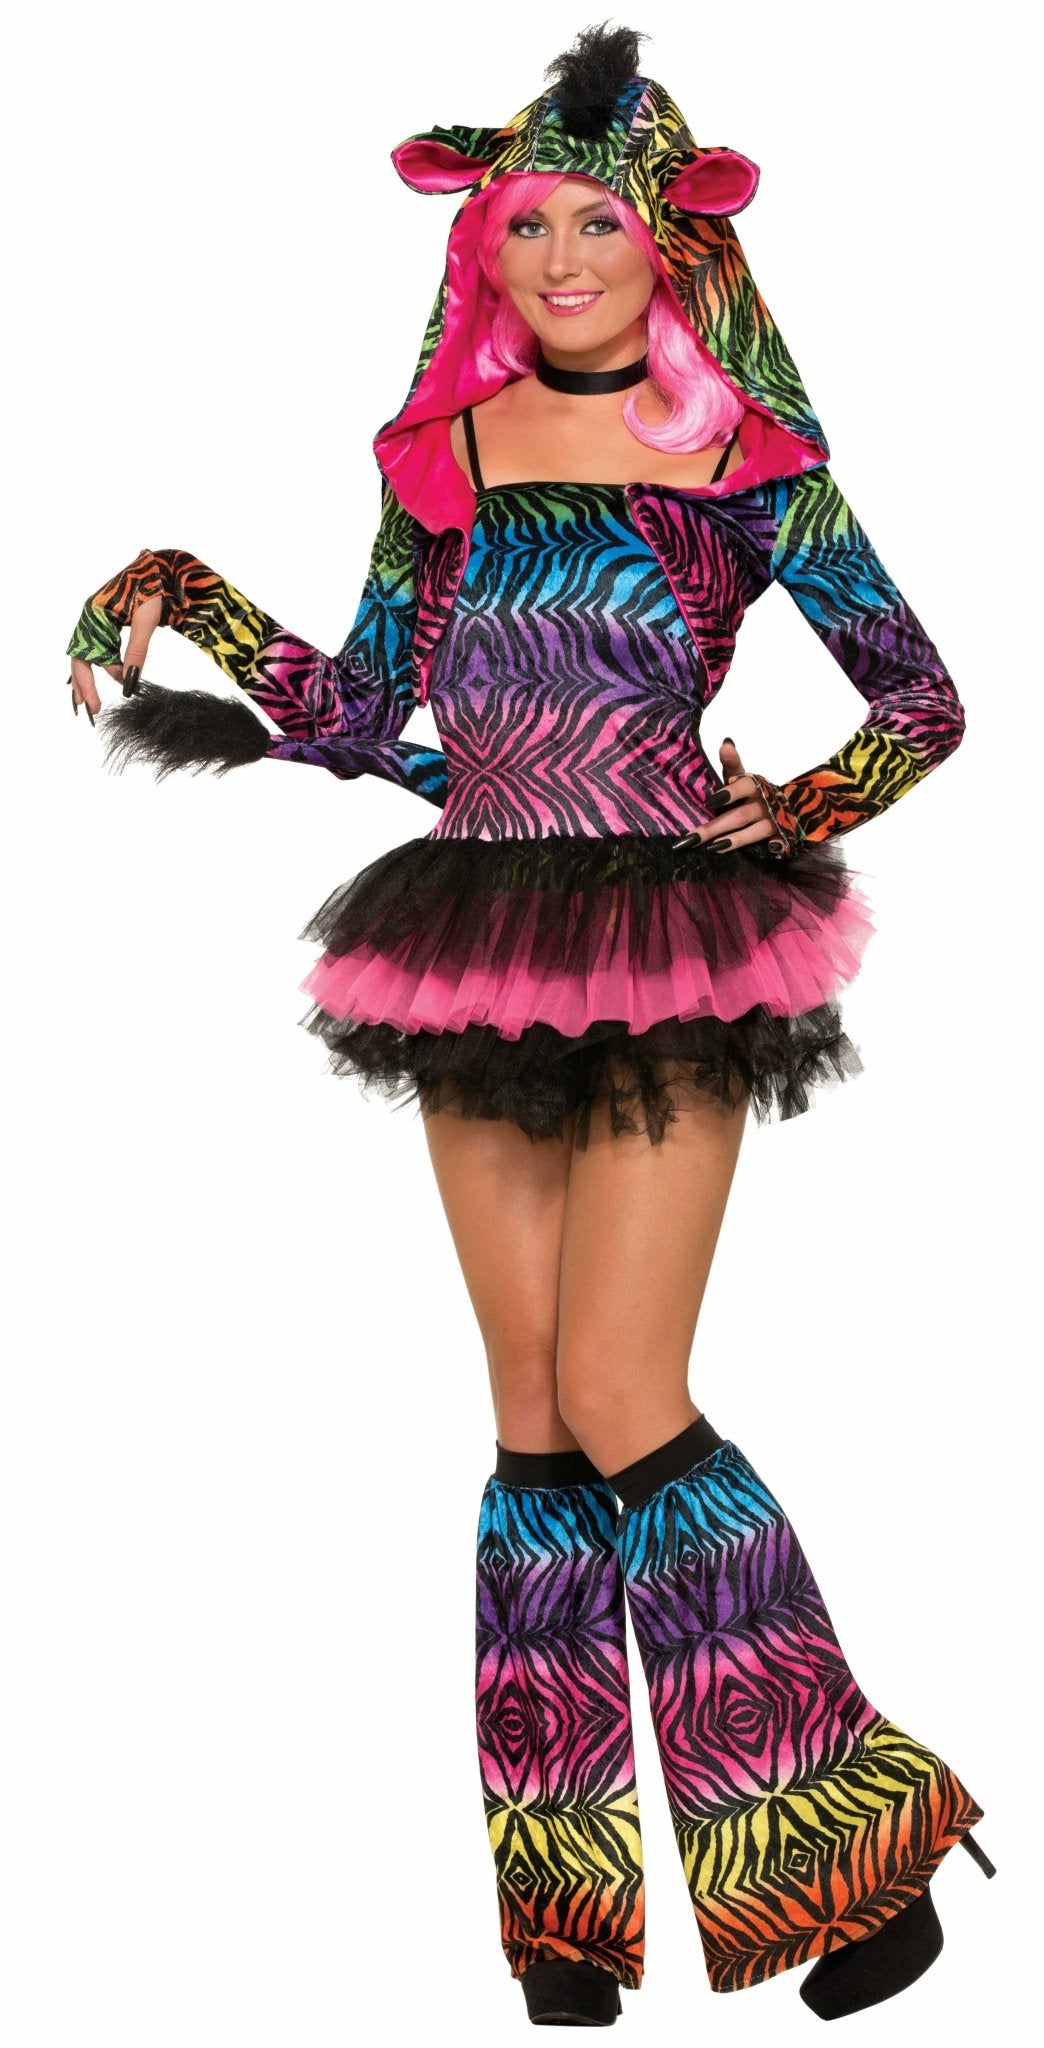 Womens Zingy Zebra 80s Costume - X-Small/Small - JJ's Party House